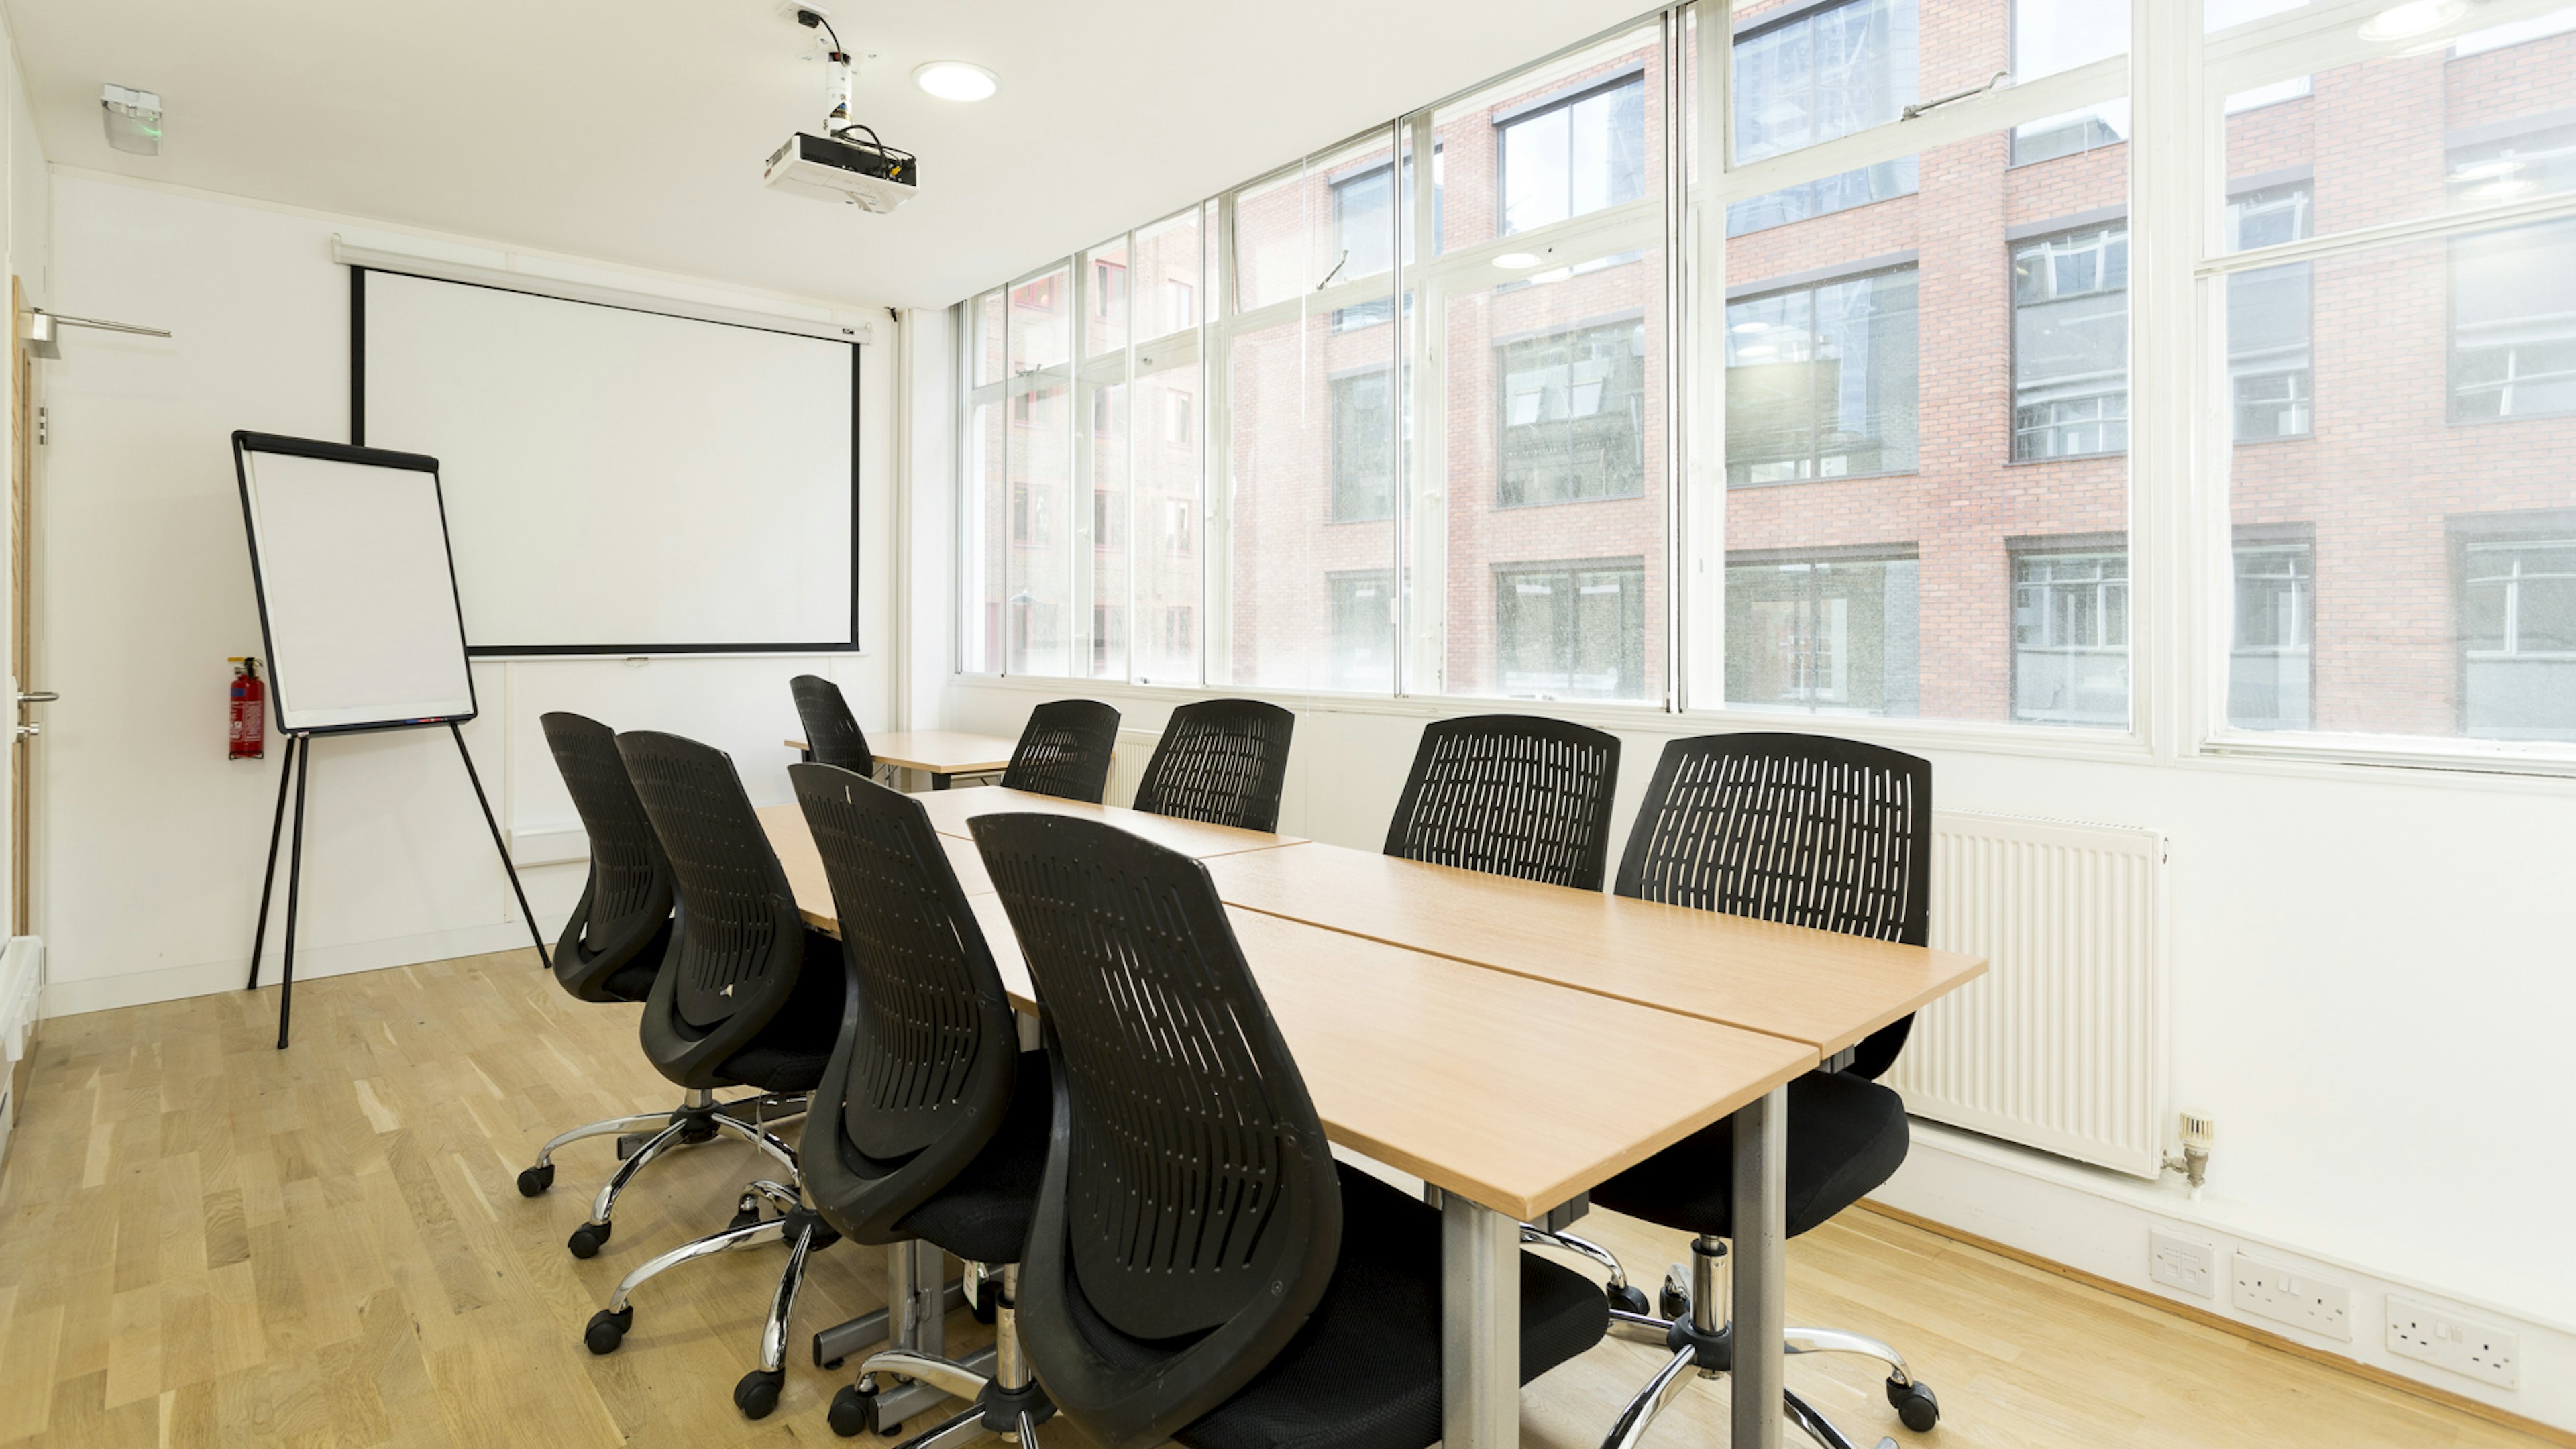 Cheap Meeting Rooms - The Training Room Hire Company - Business in Conference / Meeting Room (Small)  - Banner